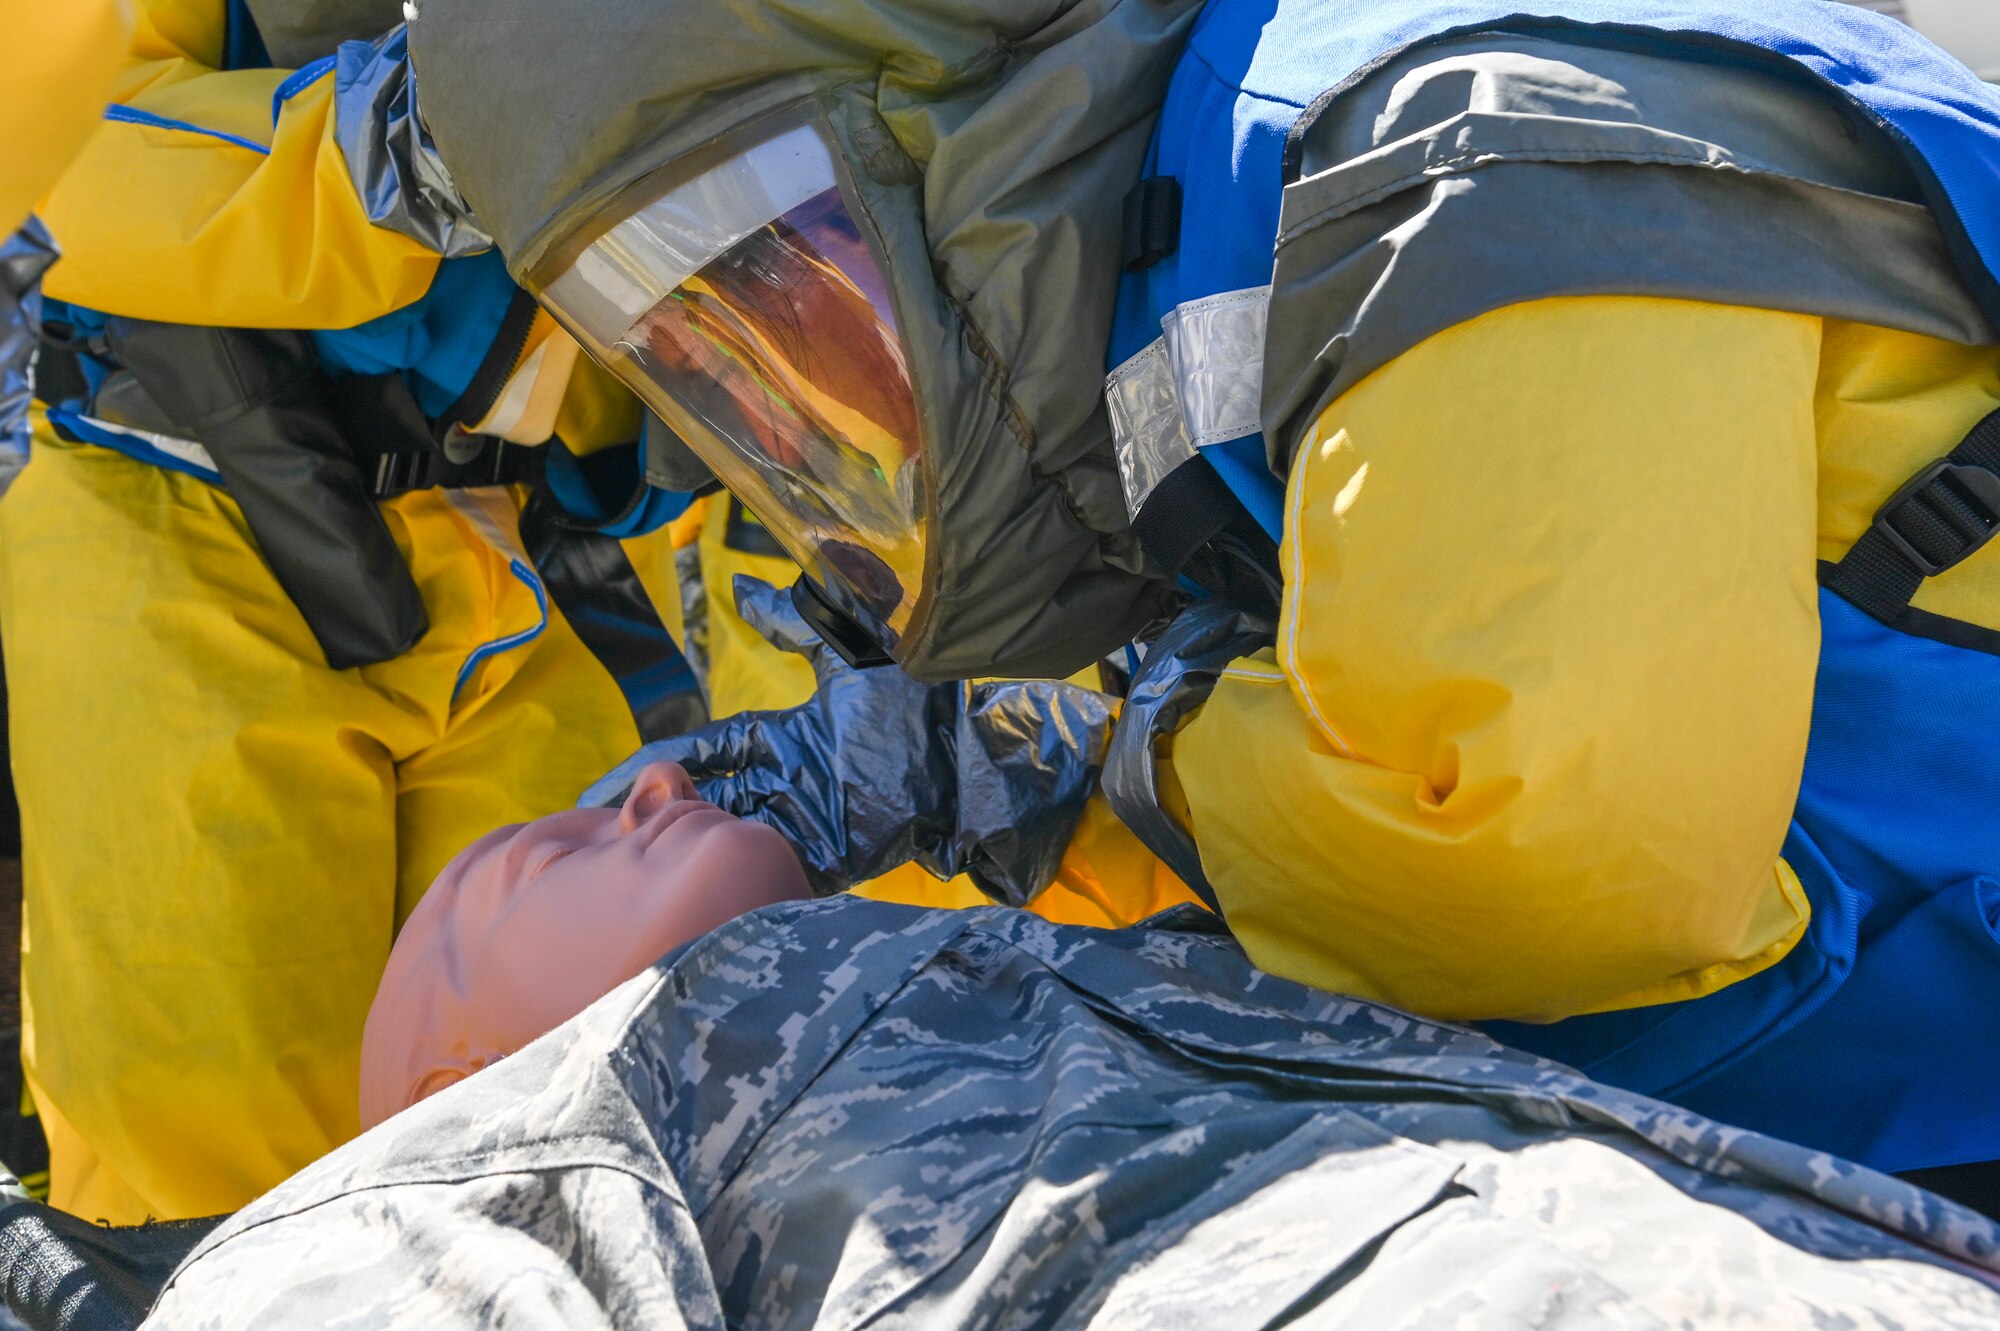 36th Medical Group apply decontamination procedures